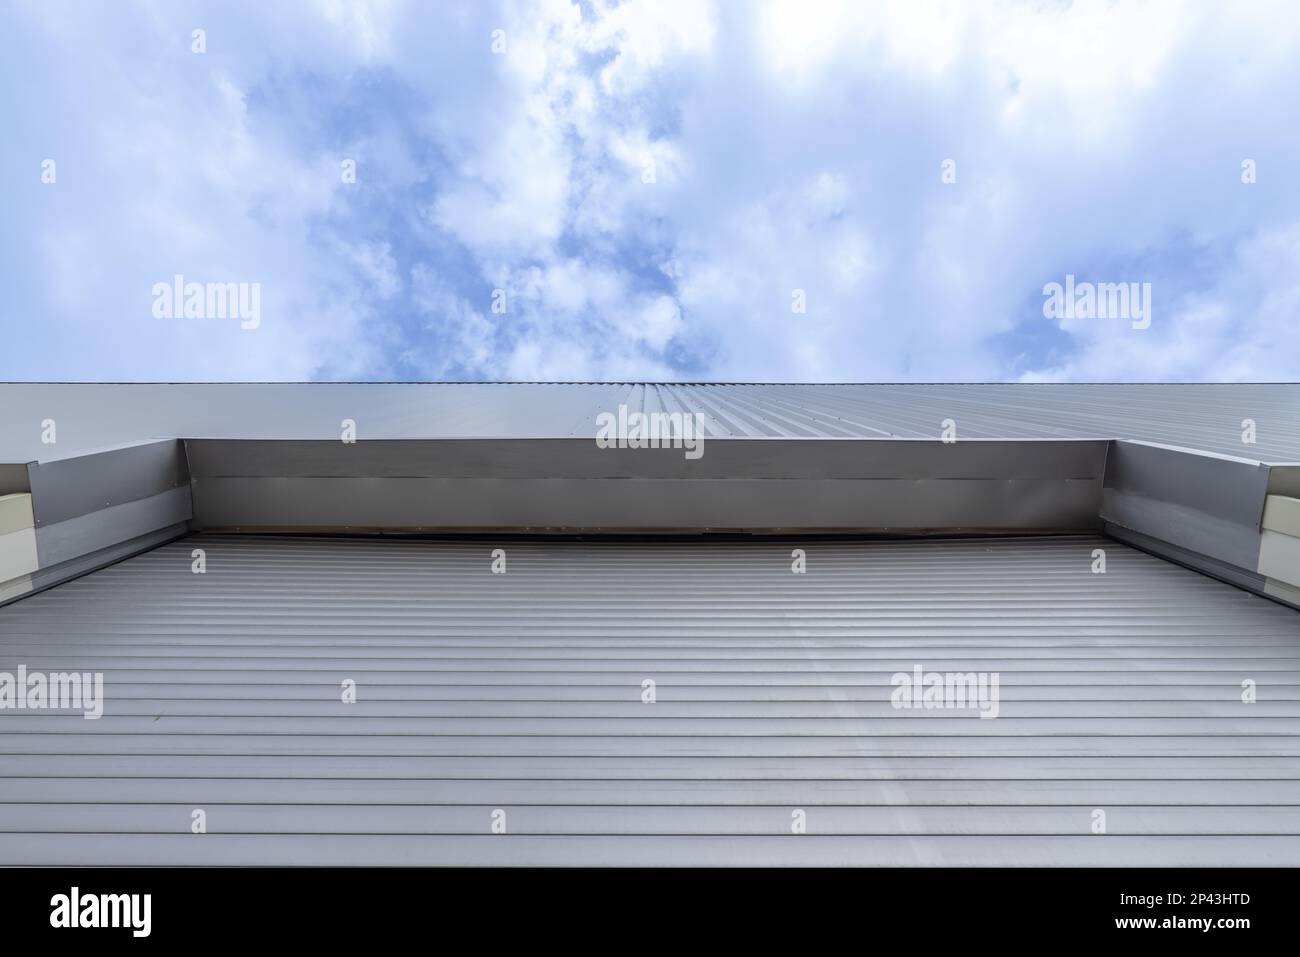 Facade of an industrial building with a retractable metal door seen from a low angle Stock Photo